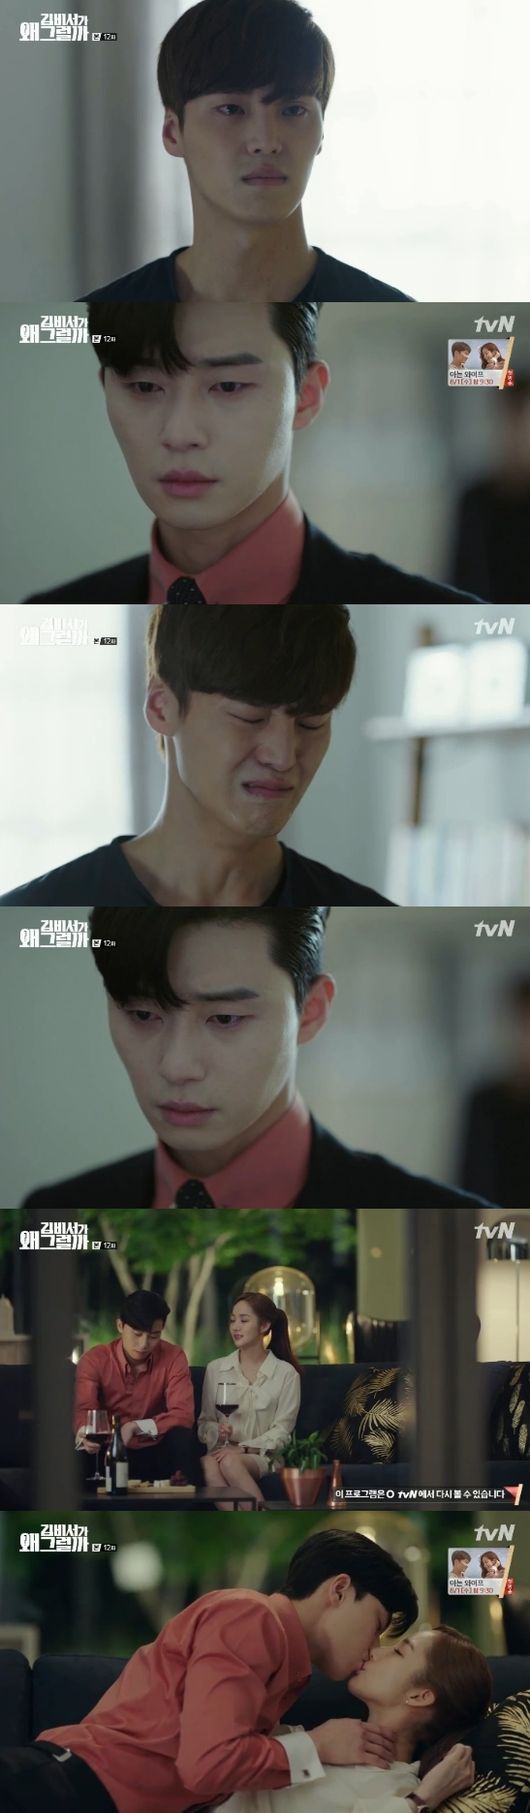 Why would Kim do that? Park Seo-joon healed the kidnapping trauma and held both lovers and family in his arms.In TVNs drama Why is Secretary Kim doing that? broadcast on the 12th, Lee Yeongjun (Park Seo-joon) and Kim Mi-so (Park Min-young) were drawn closer after revealing the truth of the kidnapping incident.On this day, it was revealed that Lee Yeongjun had to live a new life as Lee Yeongjun in Lee Sung Yeon.As a child, Lee Yeongjun was kidnapped while Lee Sung-yeon (Lee Tae-hwan) left Lee Yeongjun elsewhere.He managed to save Lee Yeongjun, but Lee Sung-yeon locked himself in guilt that Lee Yeongjun was kidnapped because of him.In the end, Lee Sung-yeon changed Lee Yeongjun and Memory and showed mental abnormalities, and Lee Yeongjun began to pretend to be a victim, saying that he had been kidnapped.Lee Yeongjun, who watched this, decided to sacrifice everything.Lee Yeongjun pretended to have lost his memory at the time of the kidnapping and covered everything by saying to Lee Sung-yeon, Im sorry to have my brother kidnapped.Lee Yeongjun had to live in the wound without knowing that my wound was going to go away.Later, Ahn Lee (Kim Byung-ok) and Choi, Yeo-sa (Hye-ok KIM), said, I am sorry to have put the big burden on yourself.Blame us now, he cried, and Lee Yeongjun said, I knew that everyone would live then. Lee Yeongjun went to Lee Sung-yeon, who had lived in inferiority and anger for a while. Lee Sung-yeon said, You should have believed me and fought me at that time.I hated you because of your arrogant judgment and spent half my life in pity. Lee Yeongjun apologized to Lee Sung-yeon, however, saying, I thought it would be okay to live under the new name Lee Yeongjun, and I thought it would be okay if I sacrificed.I was arrogant, as you said, and I am sorry that I took away the opportunity to live properly. Lee Sung-yeon also began to solve the problem. Lee Sung-yeon said, Im sorry. I should not have been me then.Later, Lee Sung-yeon shed tears of sorry, and Lee Yeongjun left behind Lee Sung-yeon.All the truths about the kidnapping were revealed, but the surroundings of Lee Yeongjun were rather peaceful. Nothing that Lee Yeongjun was worried about happened.The family apologized, and Kim Mi-so stood by him as we fought through the trauma and jinx.Lee Yeongjun, who began to heal both love and family and to cure the trauma, kissed her after saying, Can I be honest now?Everything was going smoothly, and Kim Secretary healed the viewer.tvN broadcast screen